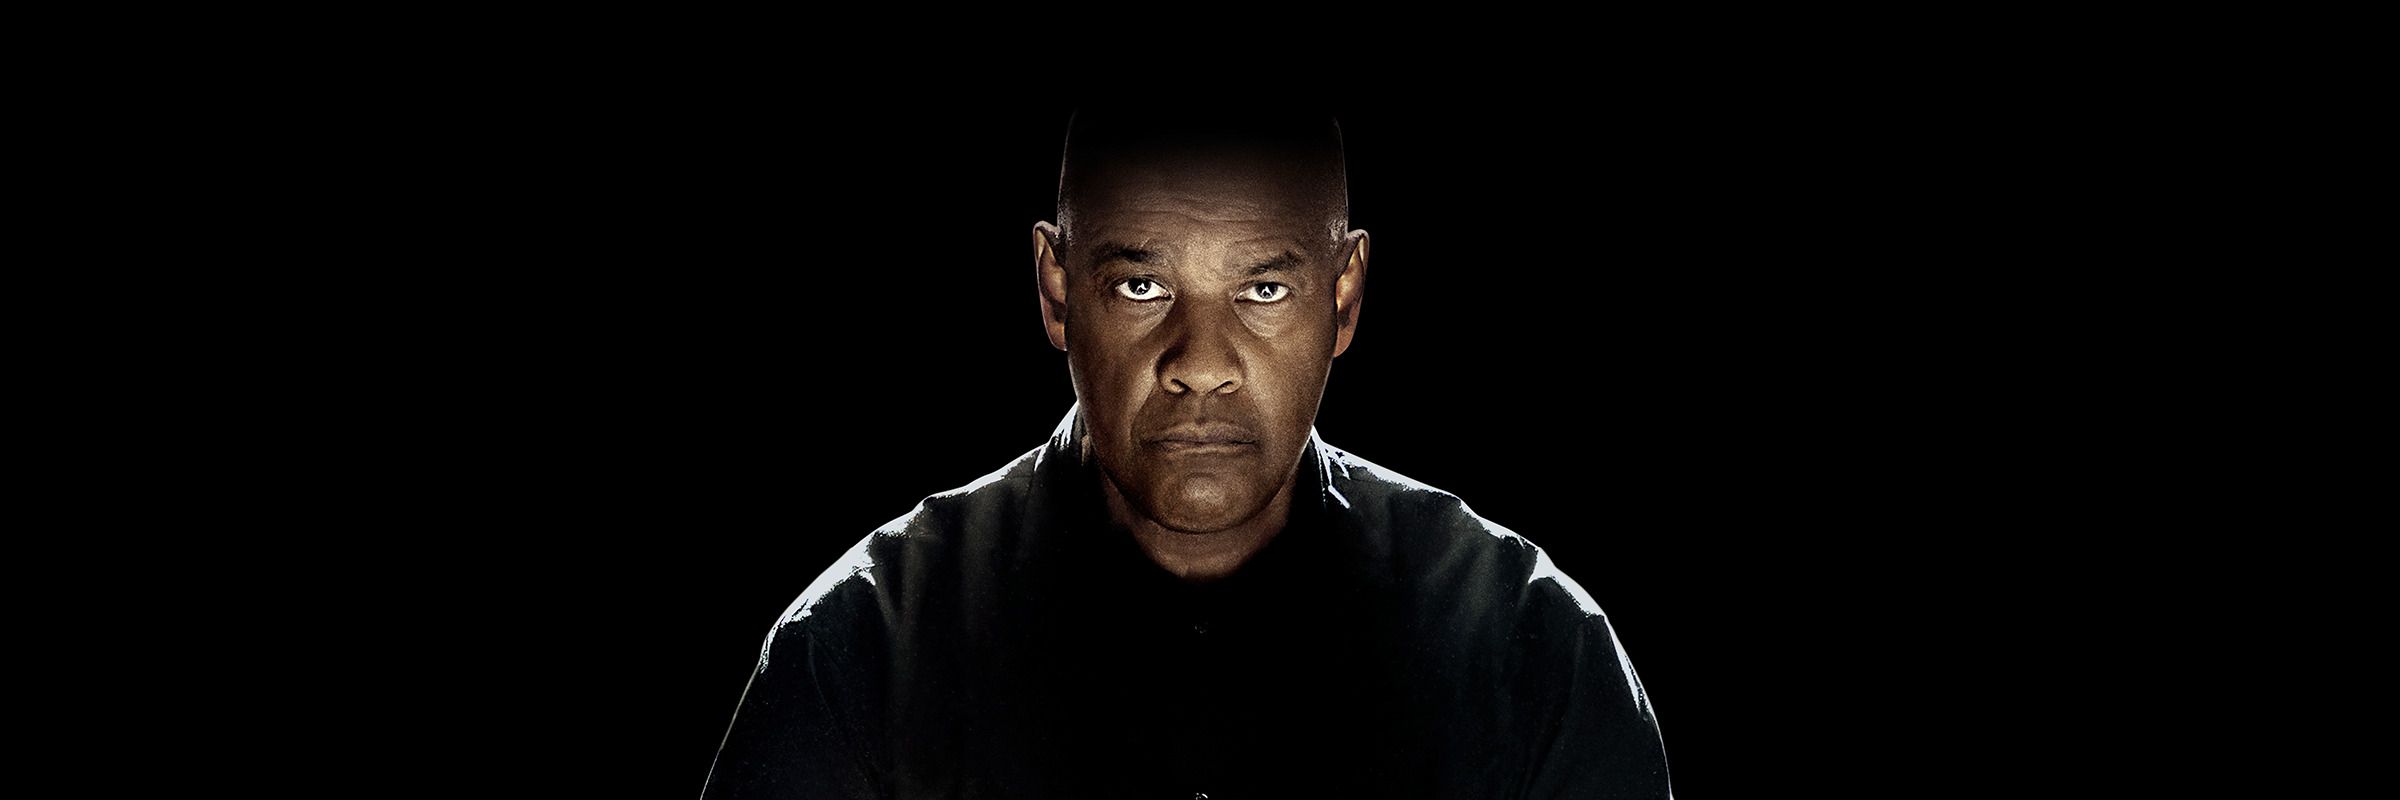 MOVIE REVIEW] The Equalizer 3: A disappointing end to a great